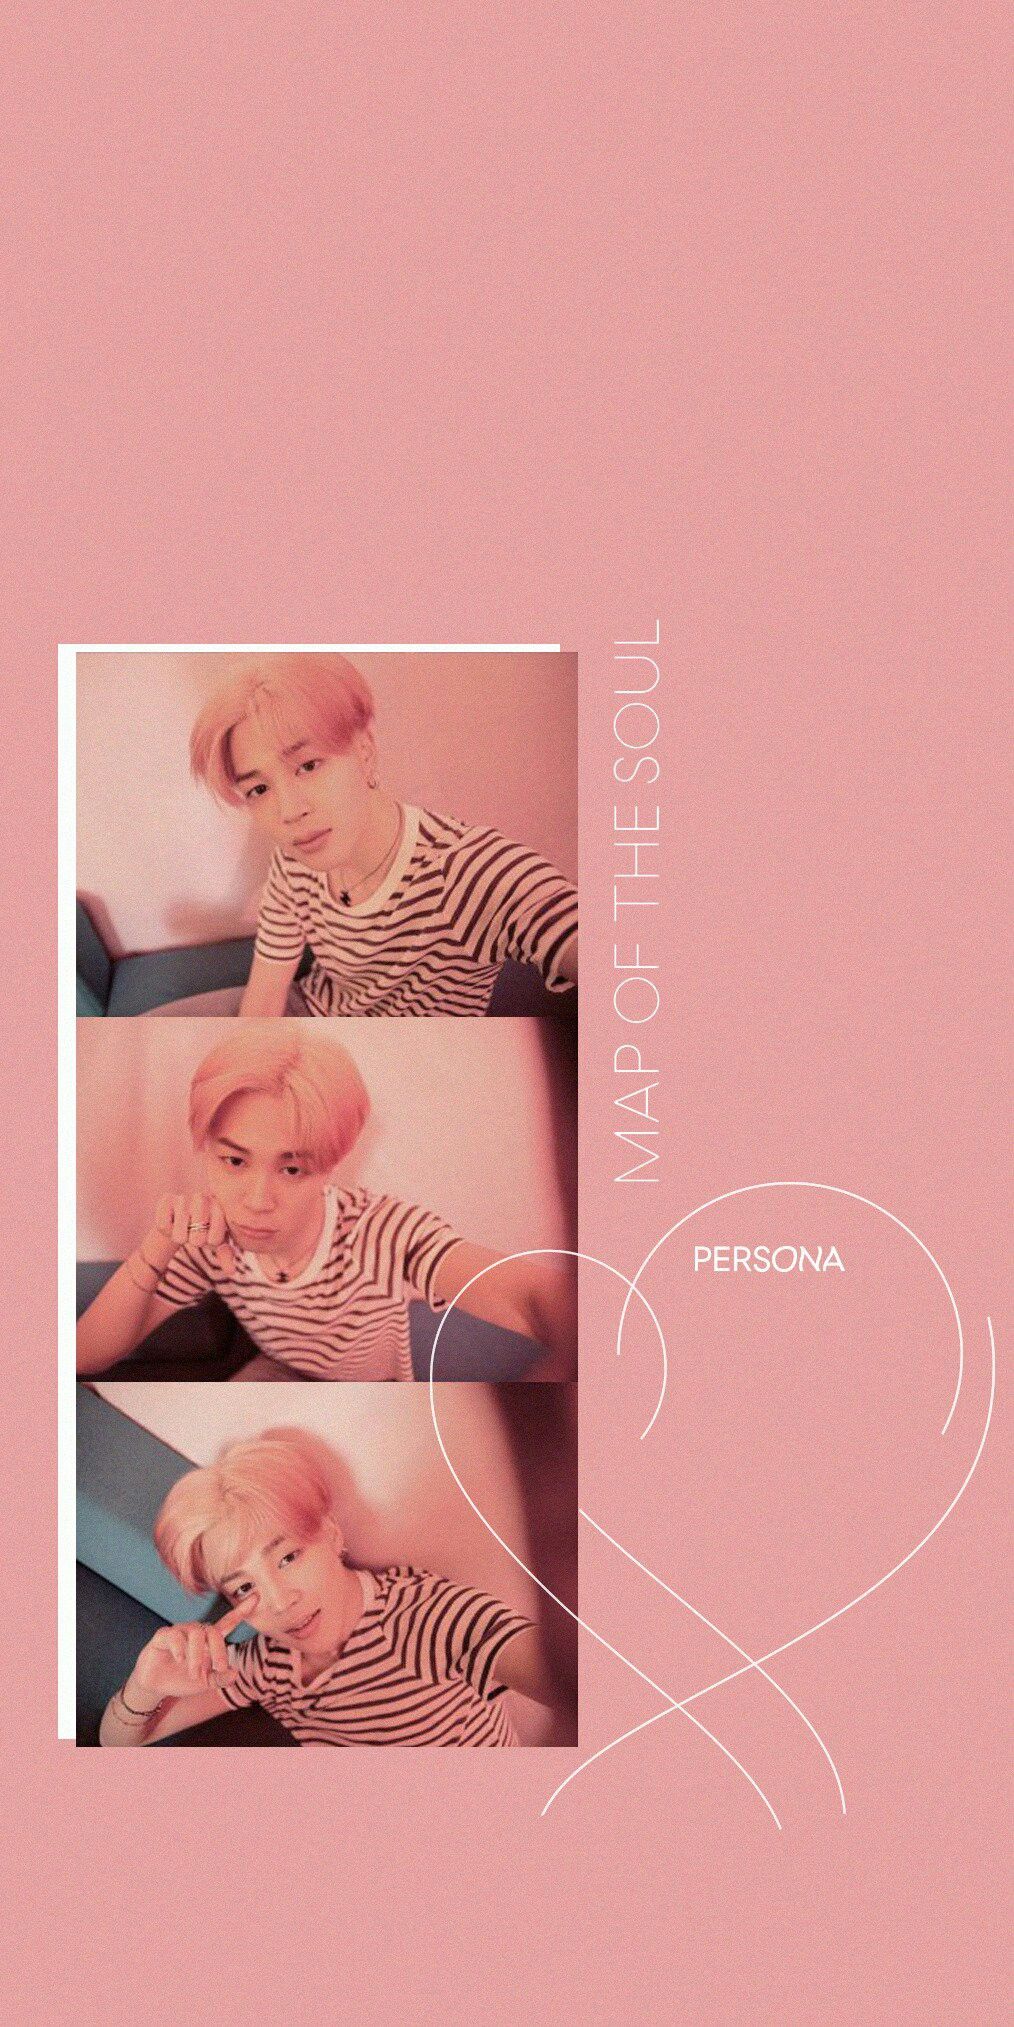 Map Of The Soul: Persona Wallpapers